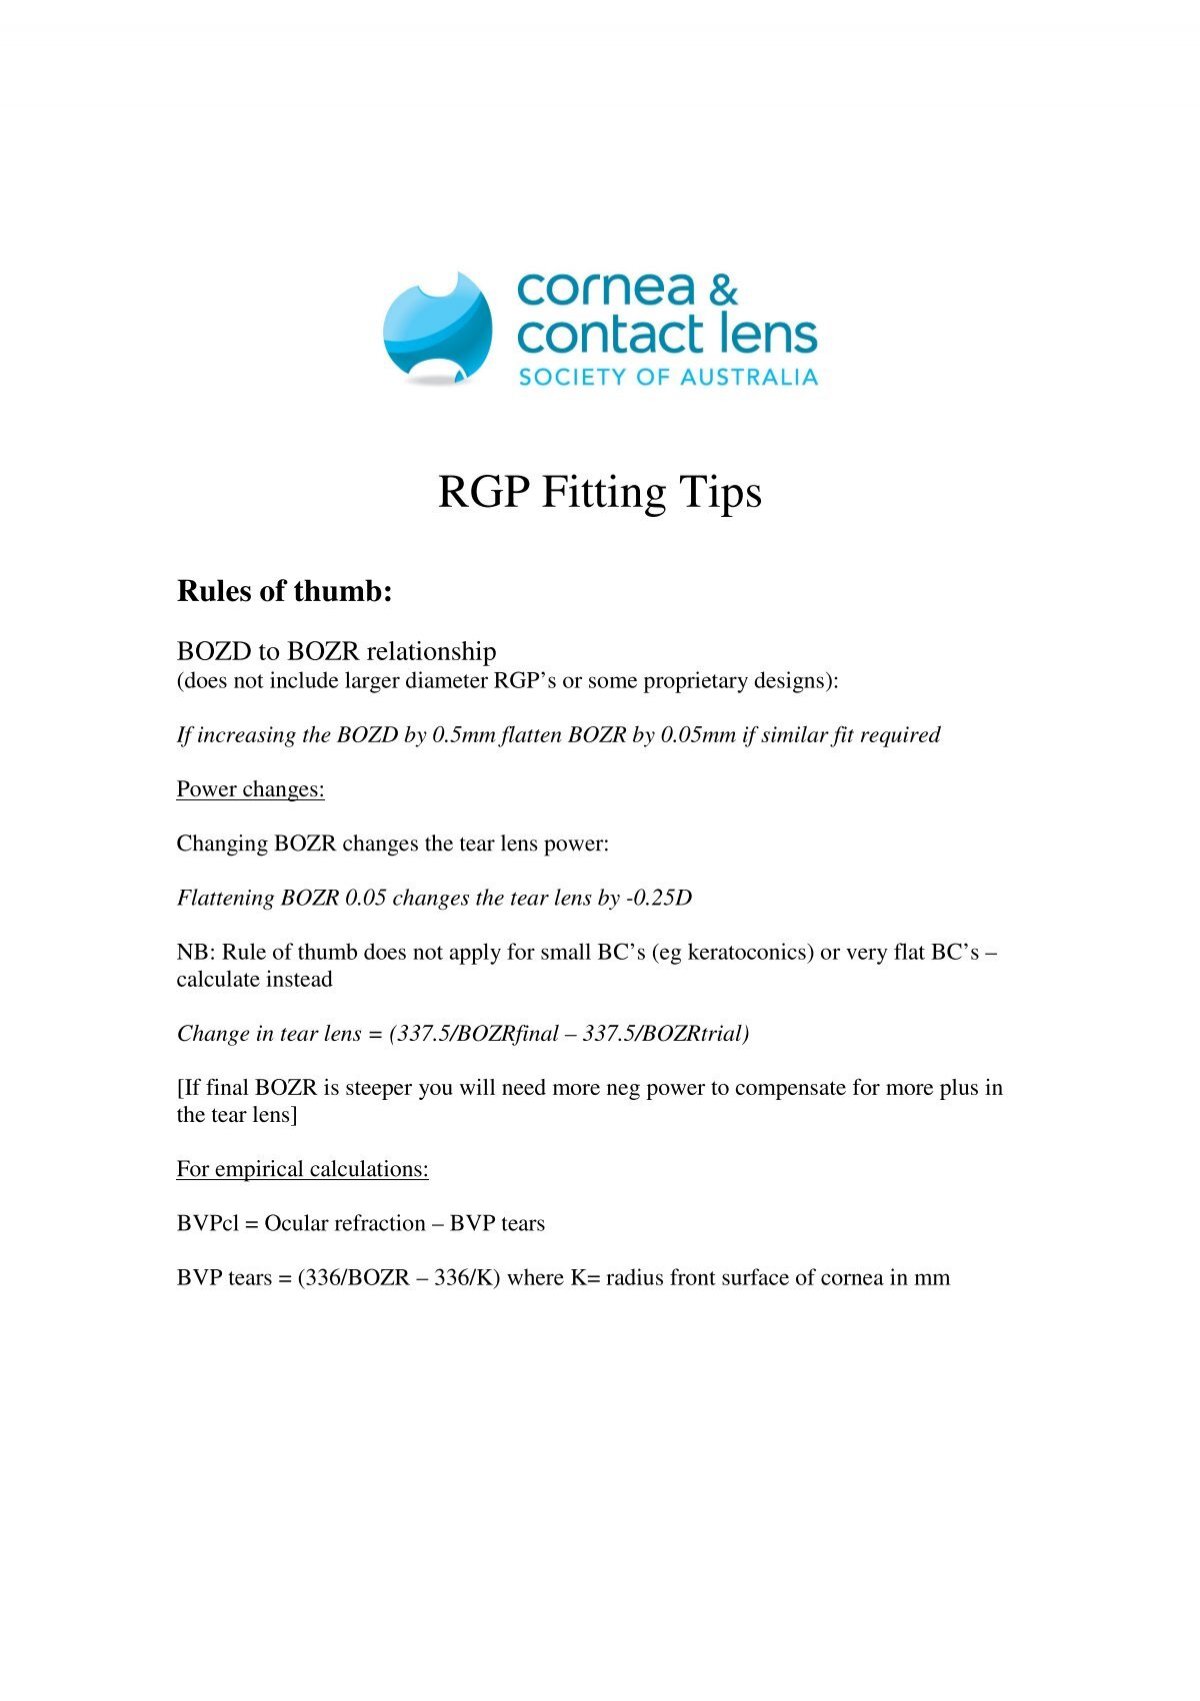 rgp-fitting-tips